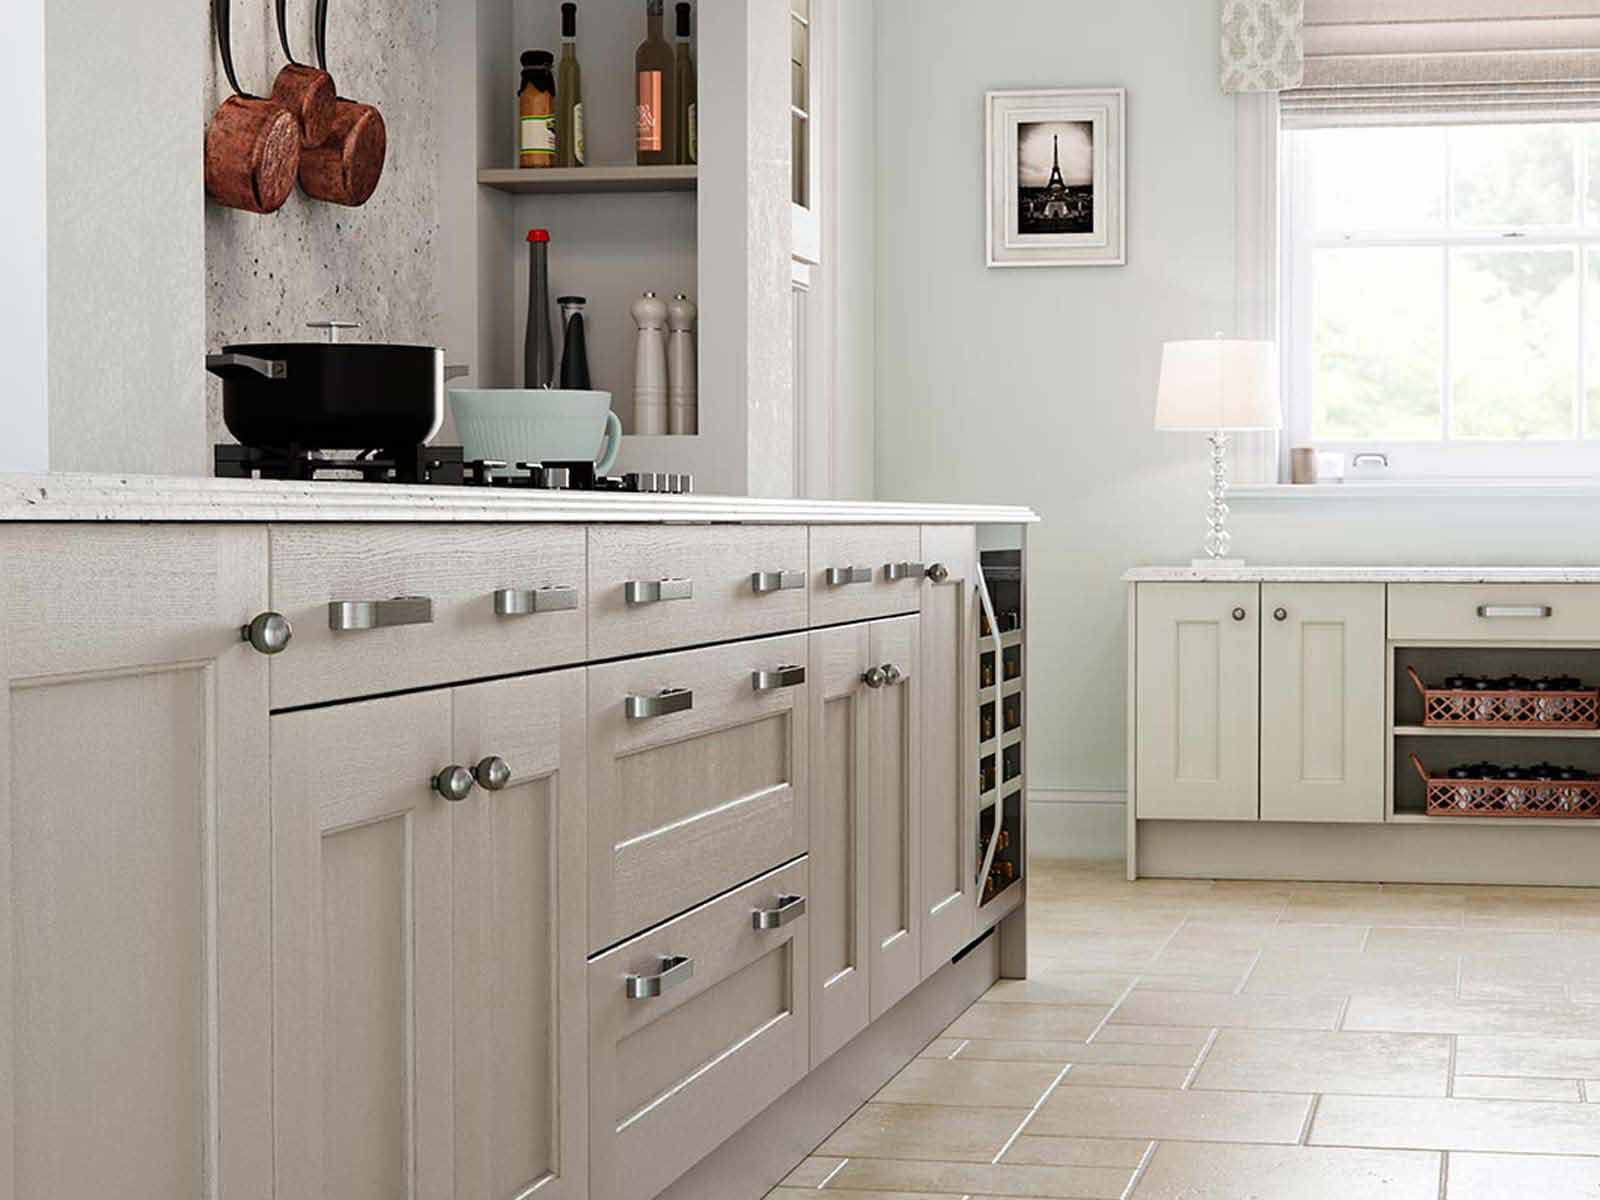 Ash wood Ashbourne kitchen cabinets with marble worktop